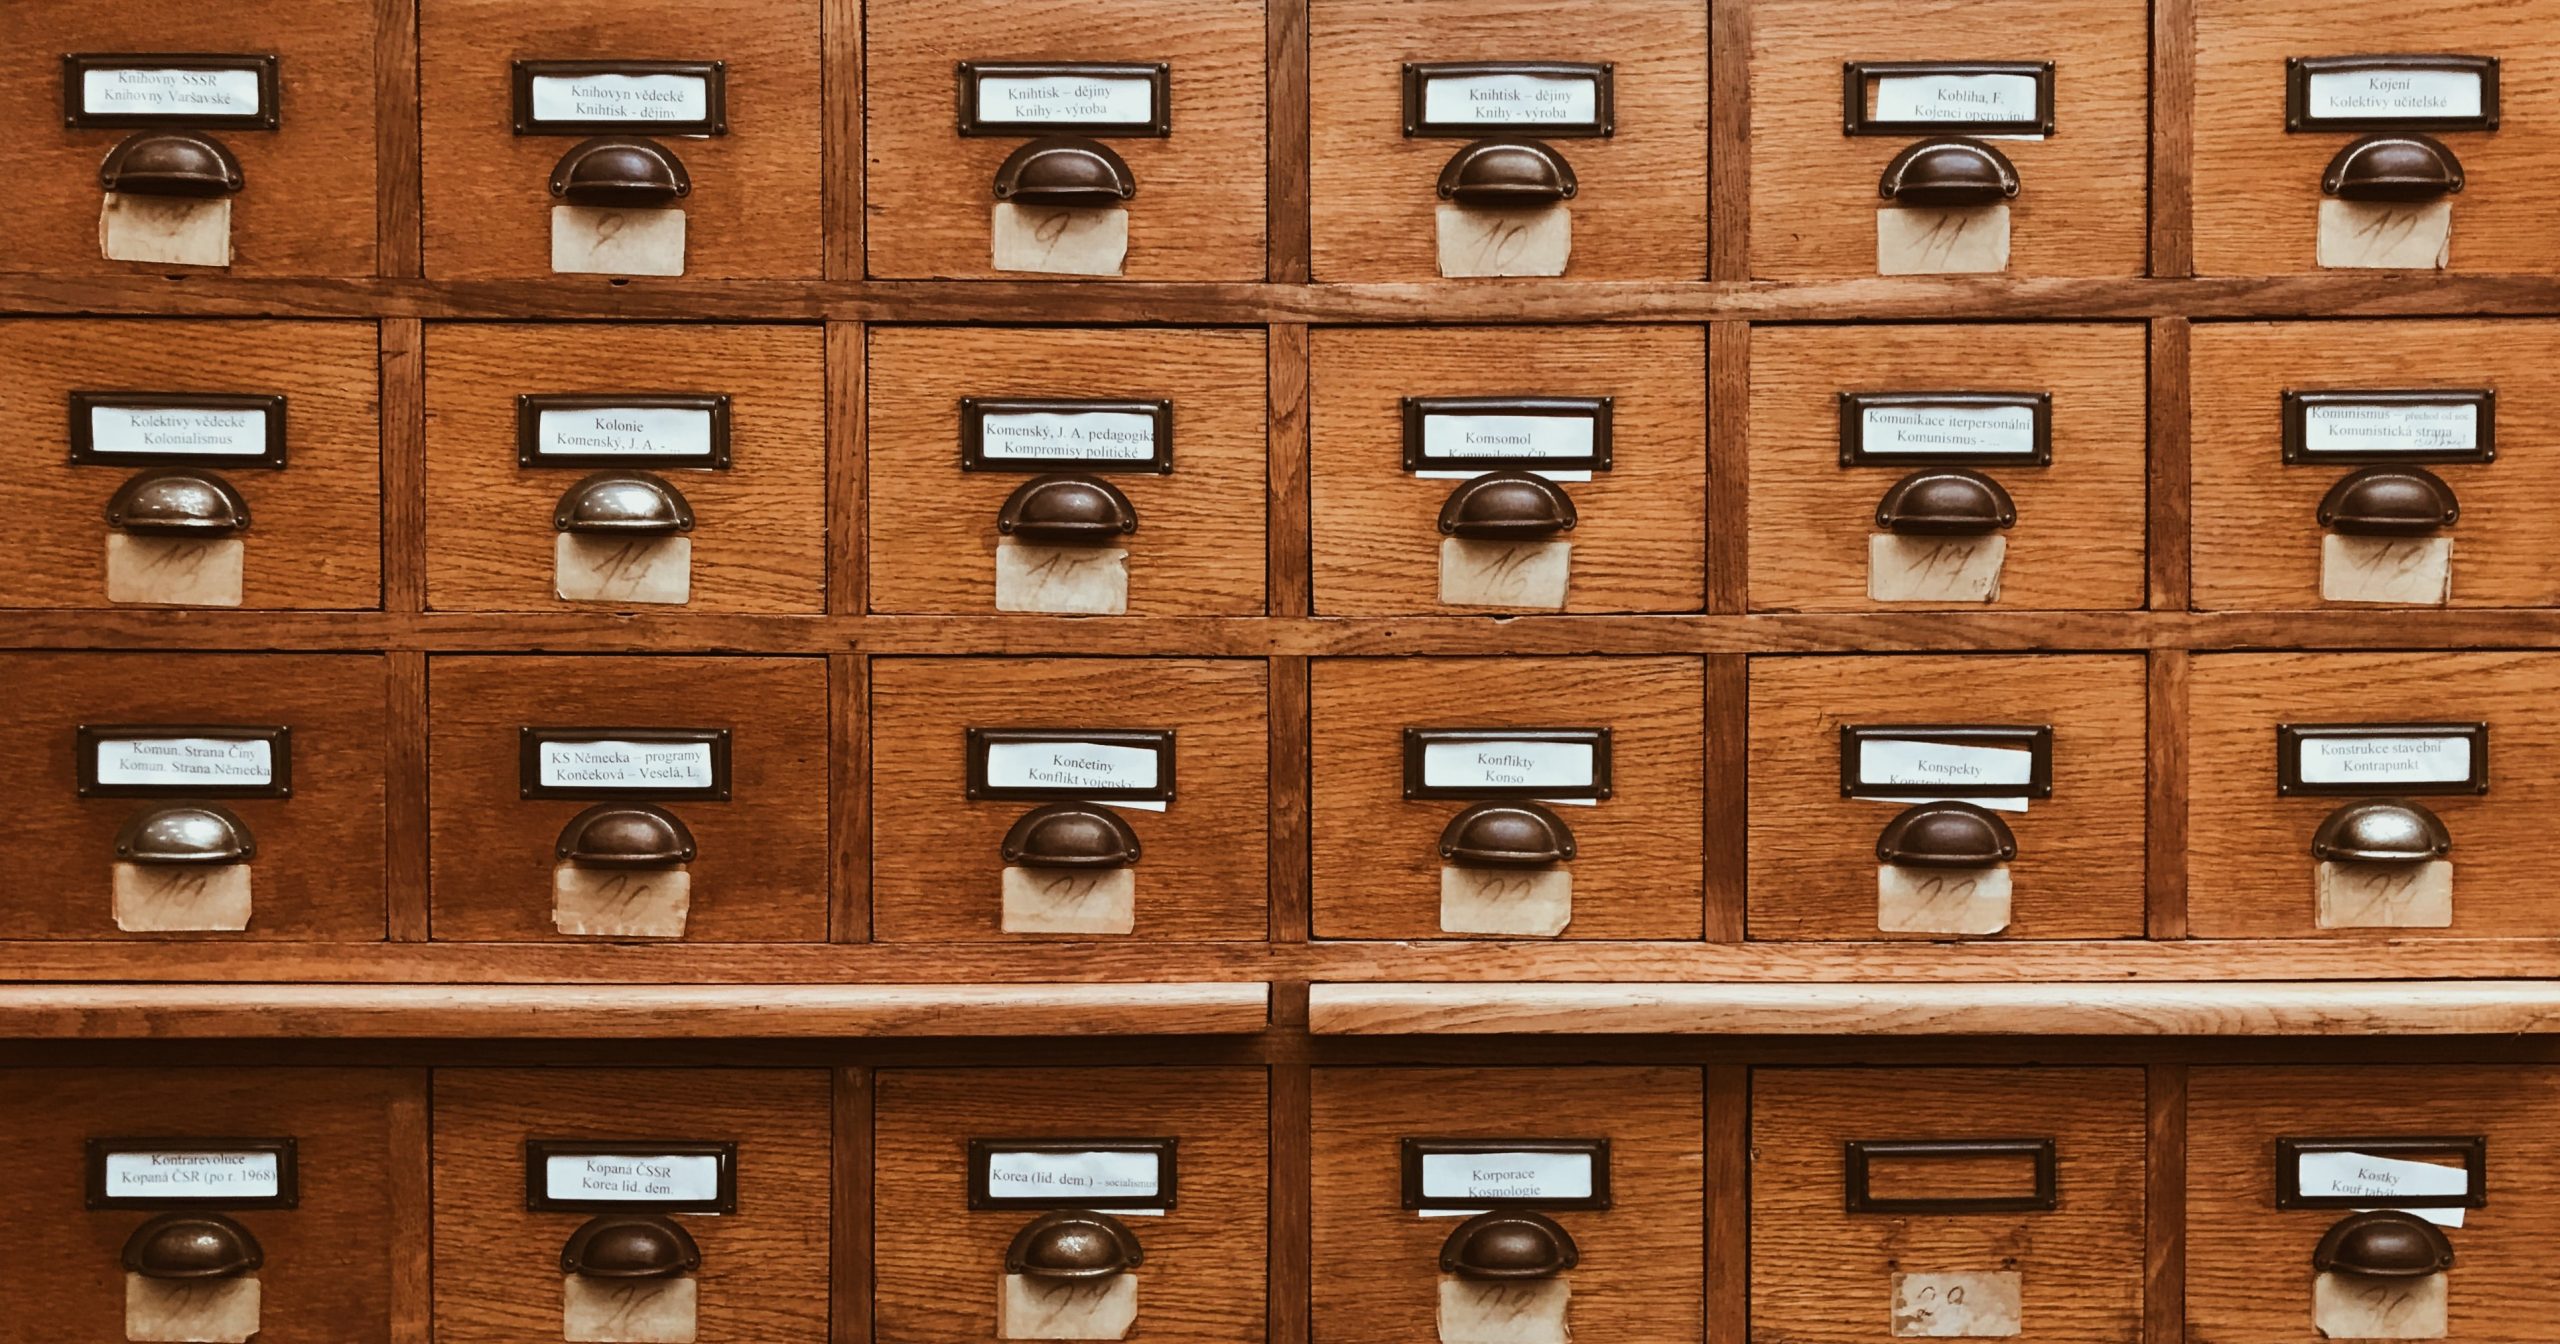 A photo of an old card catalog from a library